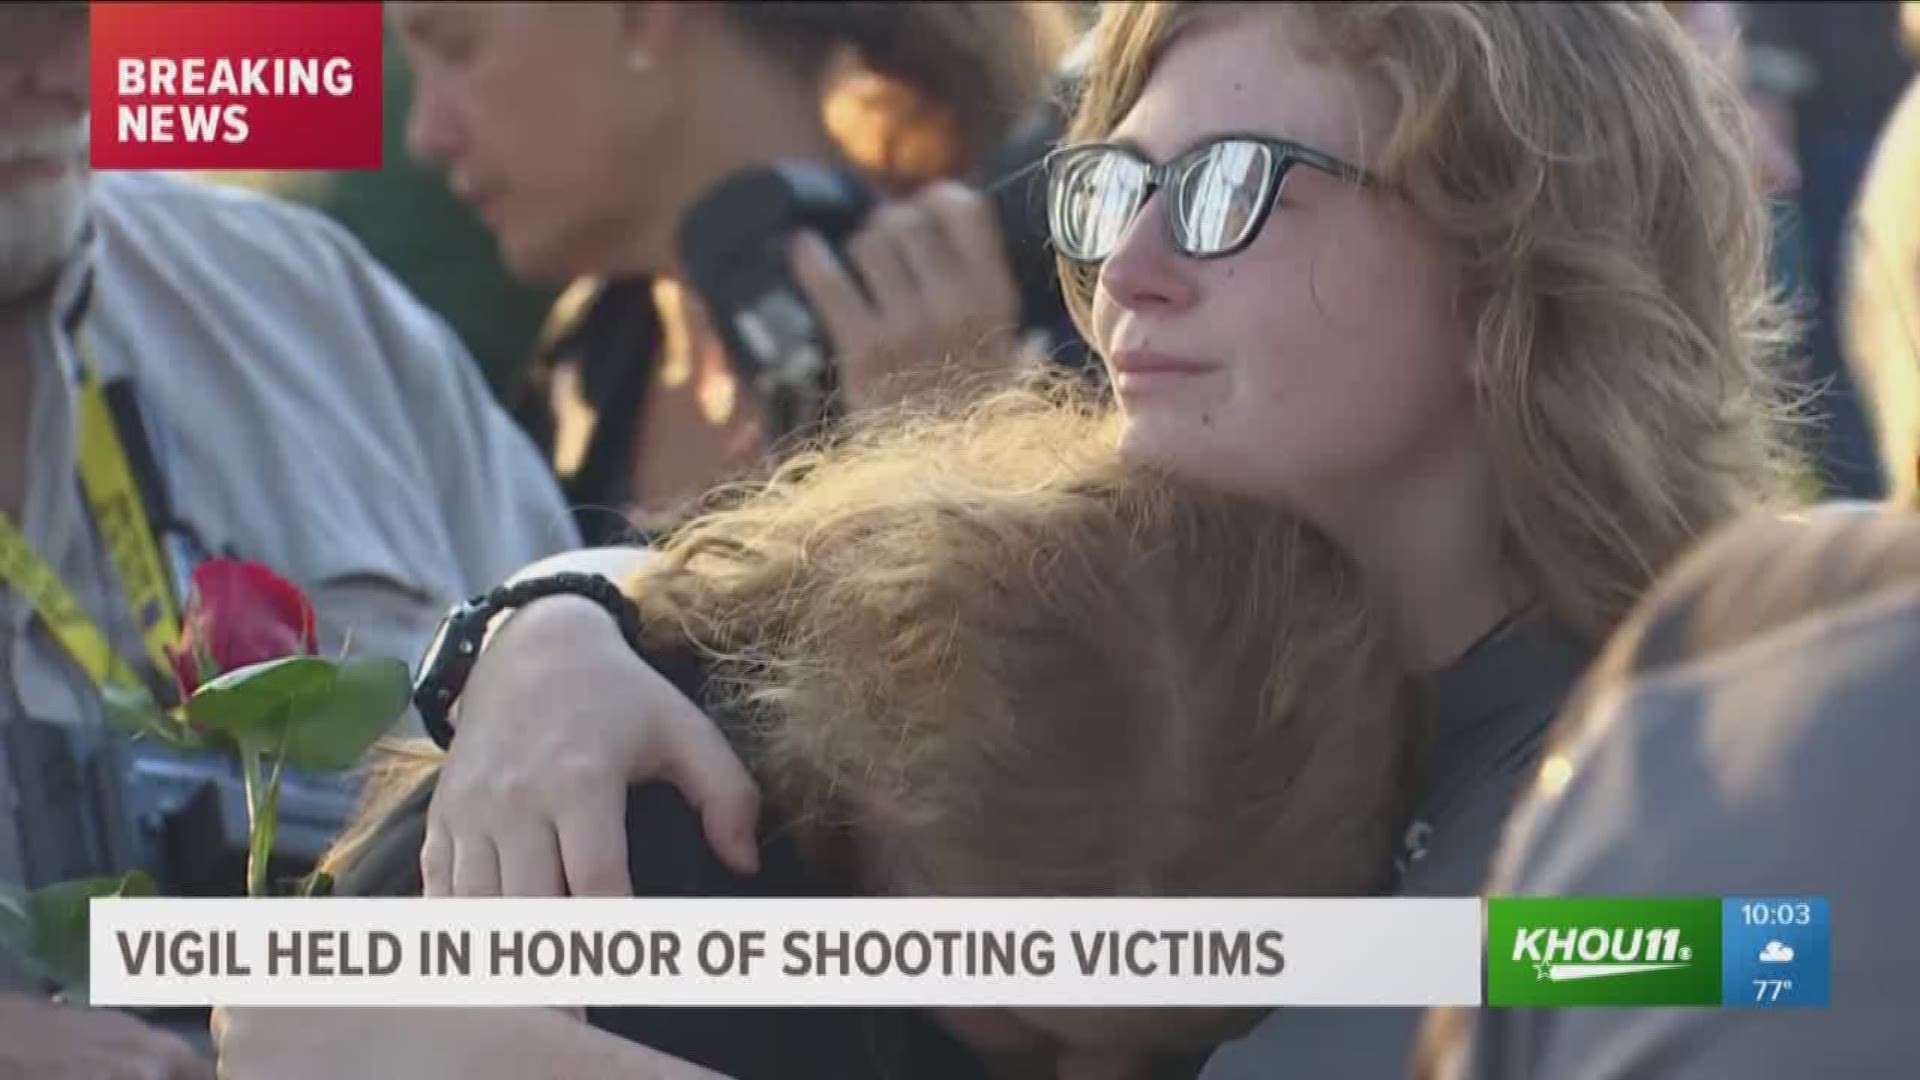 Hundreds of people gathered for a vigil on Friday night to pray for the Santa Fe High School victims, their families and community.